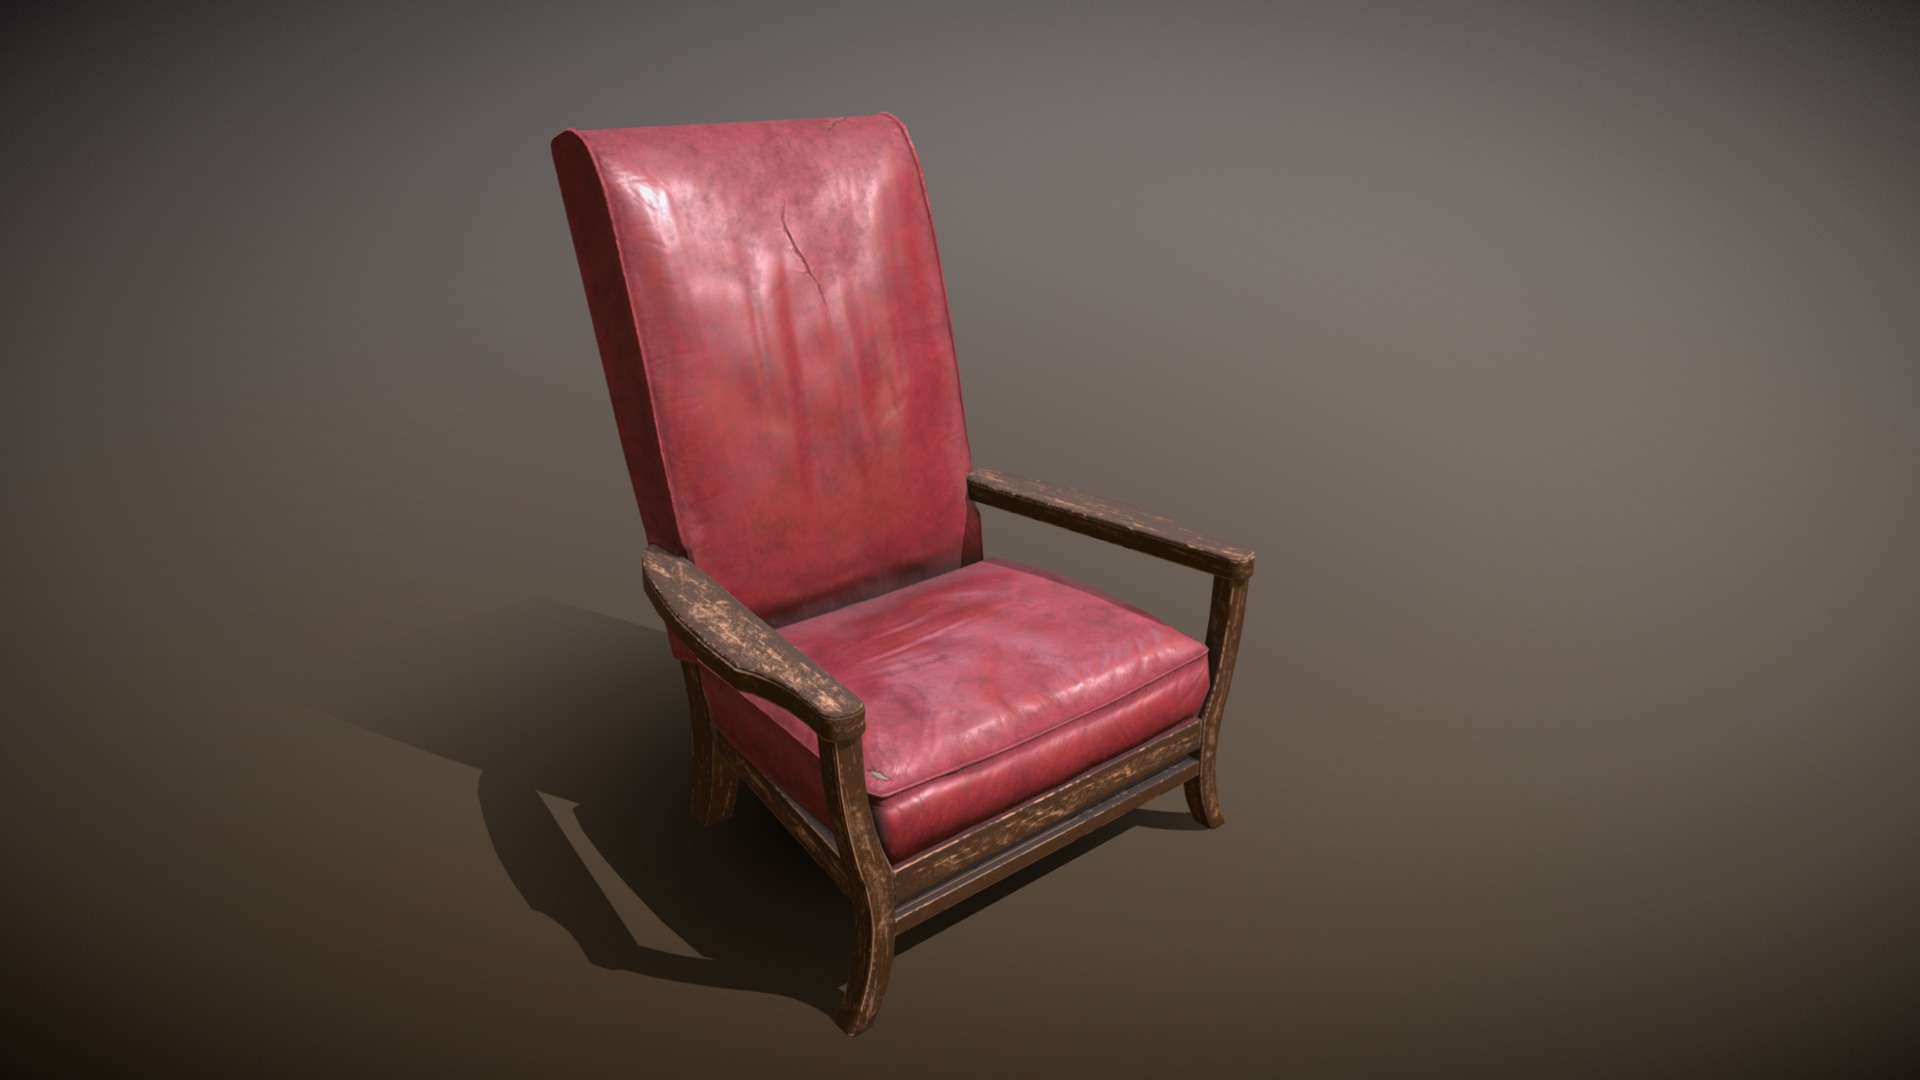 3D model Old Worn Leather Chair - This is a 3D model of the Old Worn Leather Chair. The 3D model is about a red chair with a cushion.